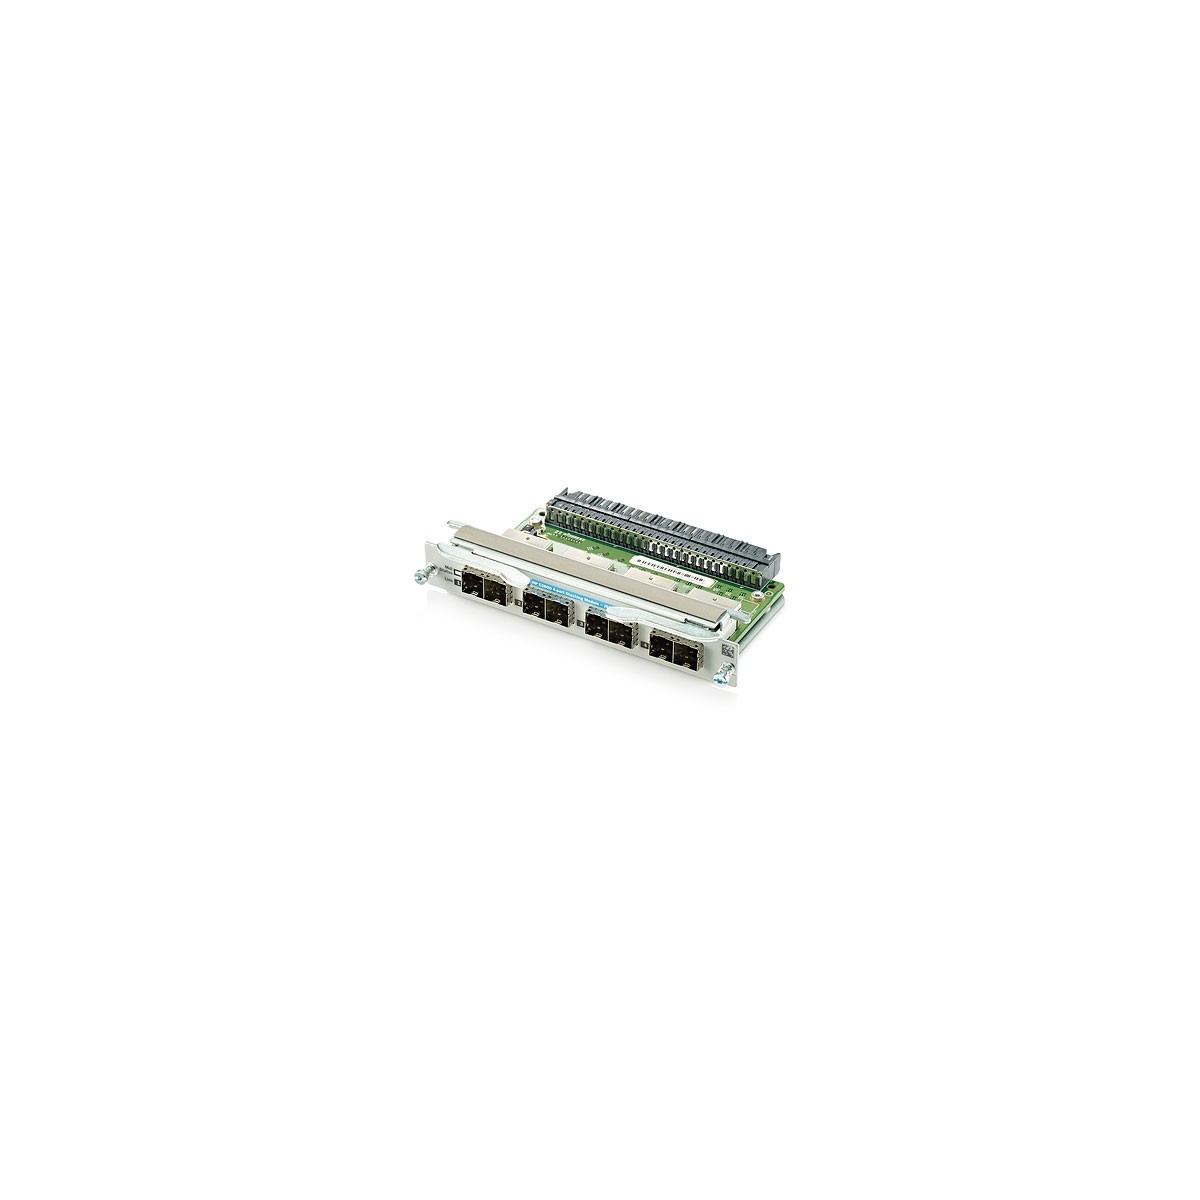 HPE 3800 4-port Stacking Module - Grey - Wired - 3800 Switch Series